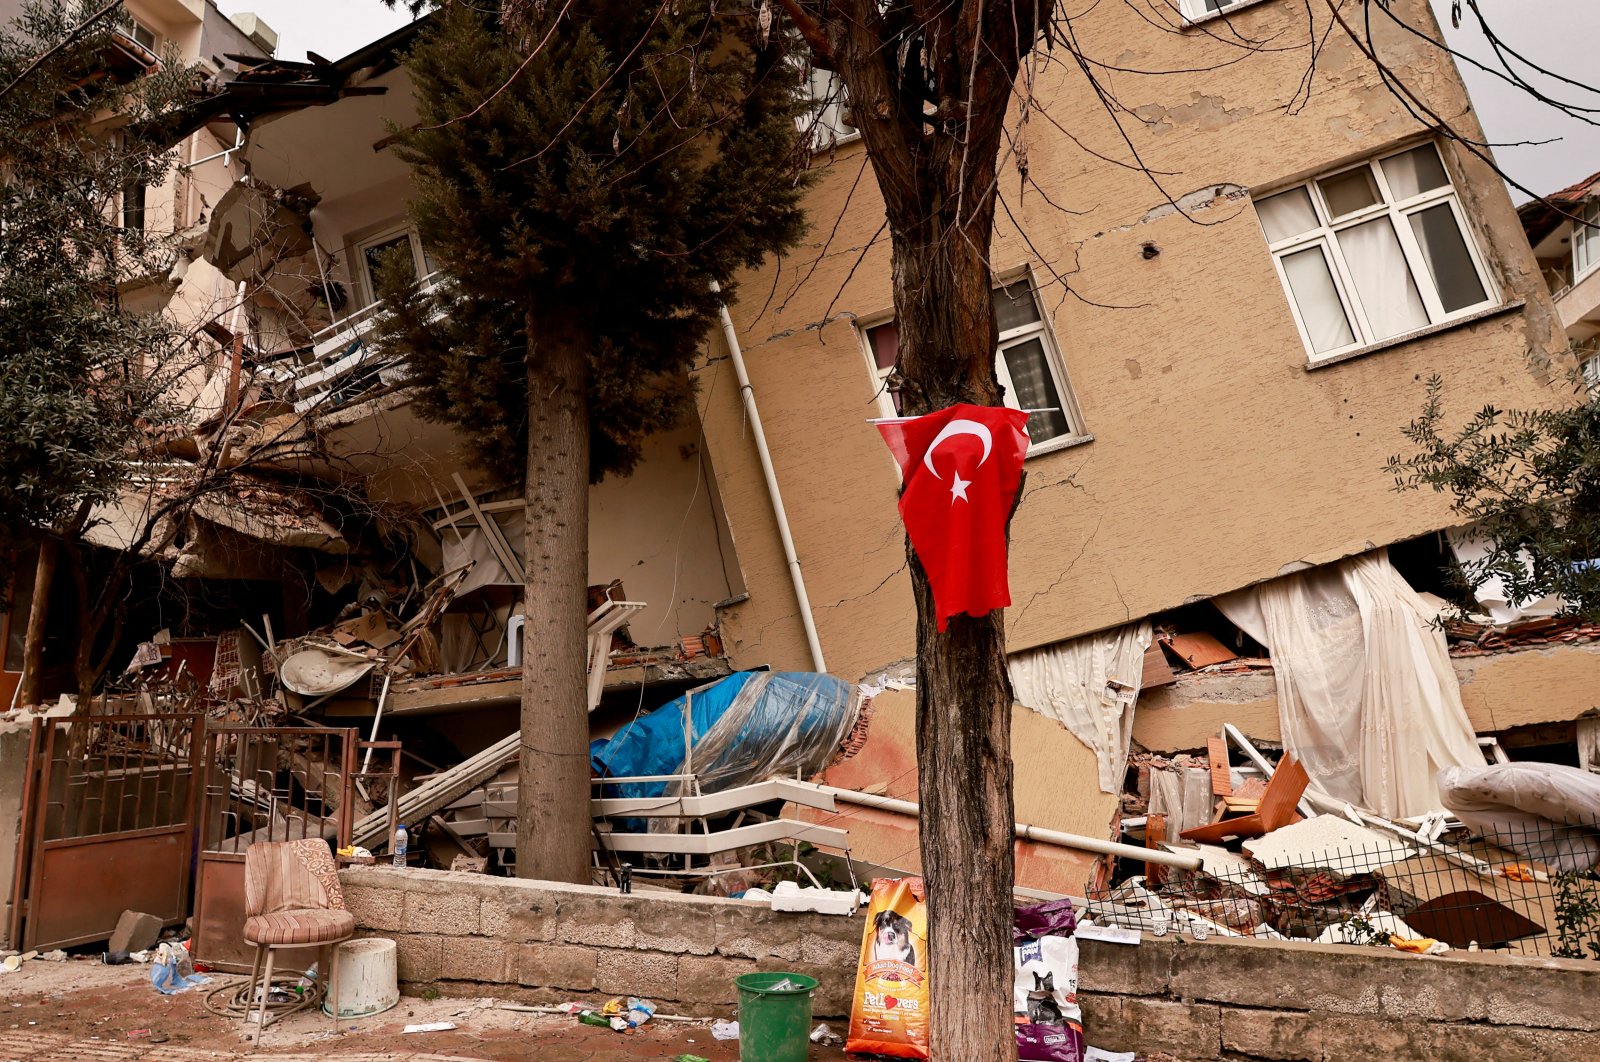 A Turkish flag is pictured near property destroyed in the earthquakes, in Hatay, southern Türkiye, Feb. 21, 2023. (Reuters Photo)